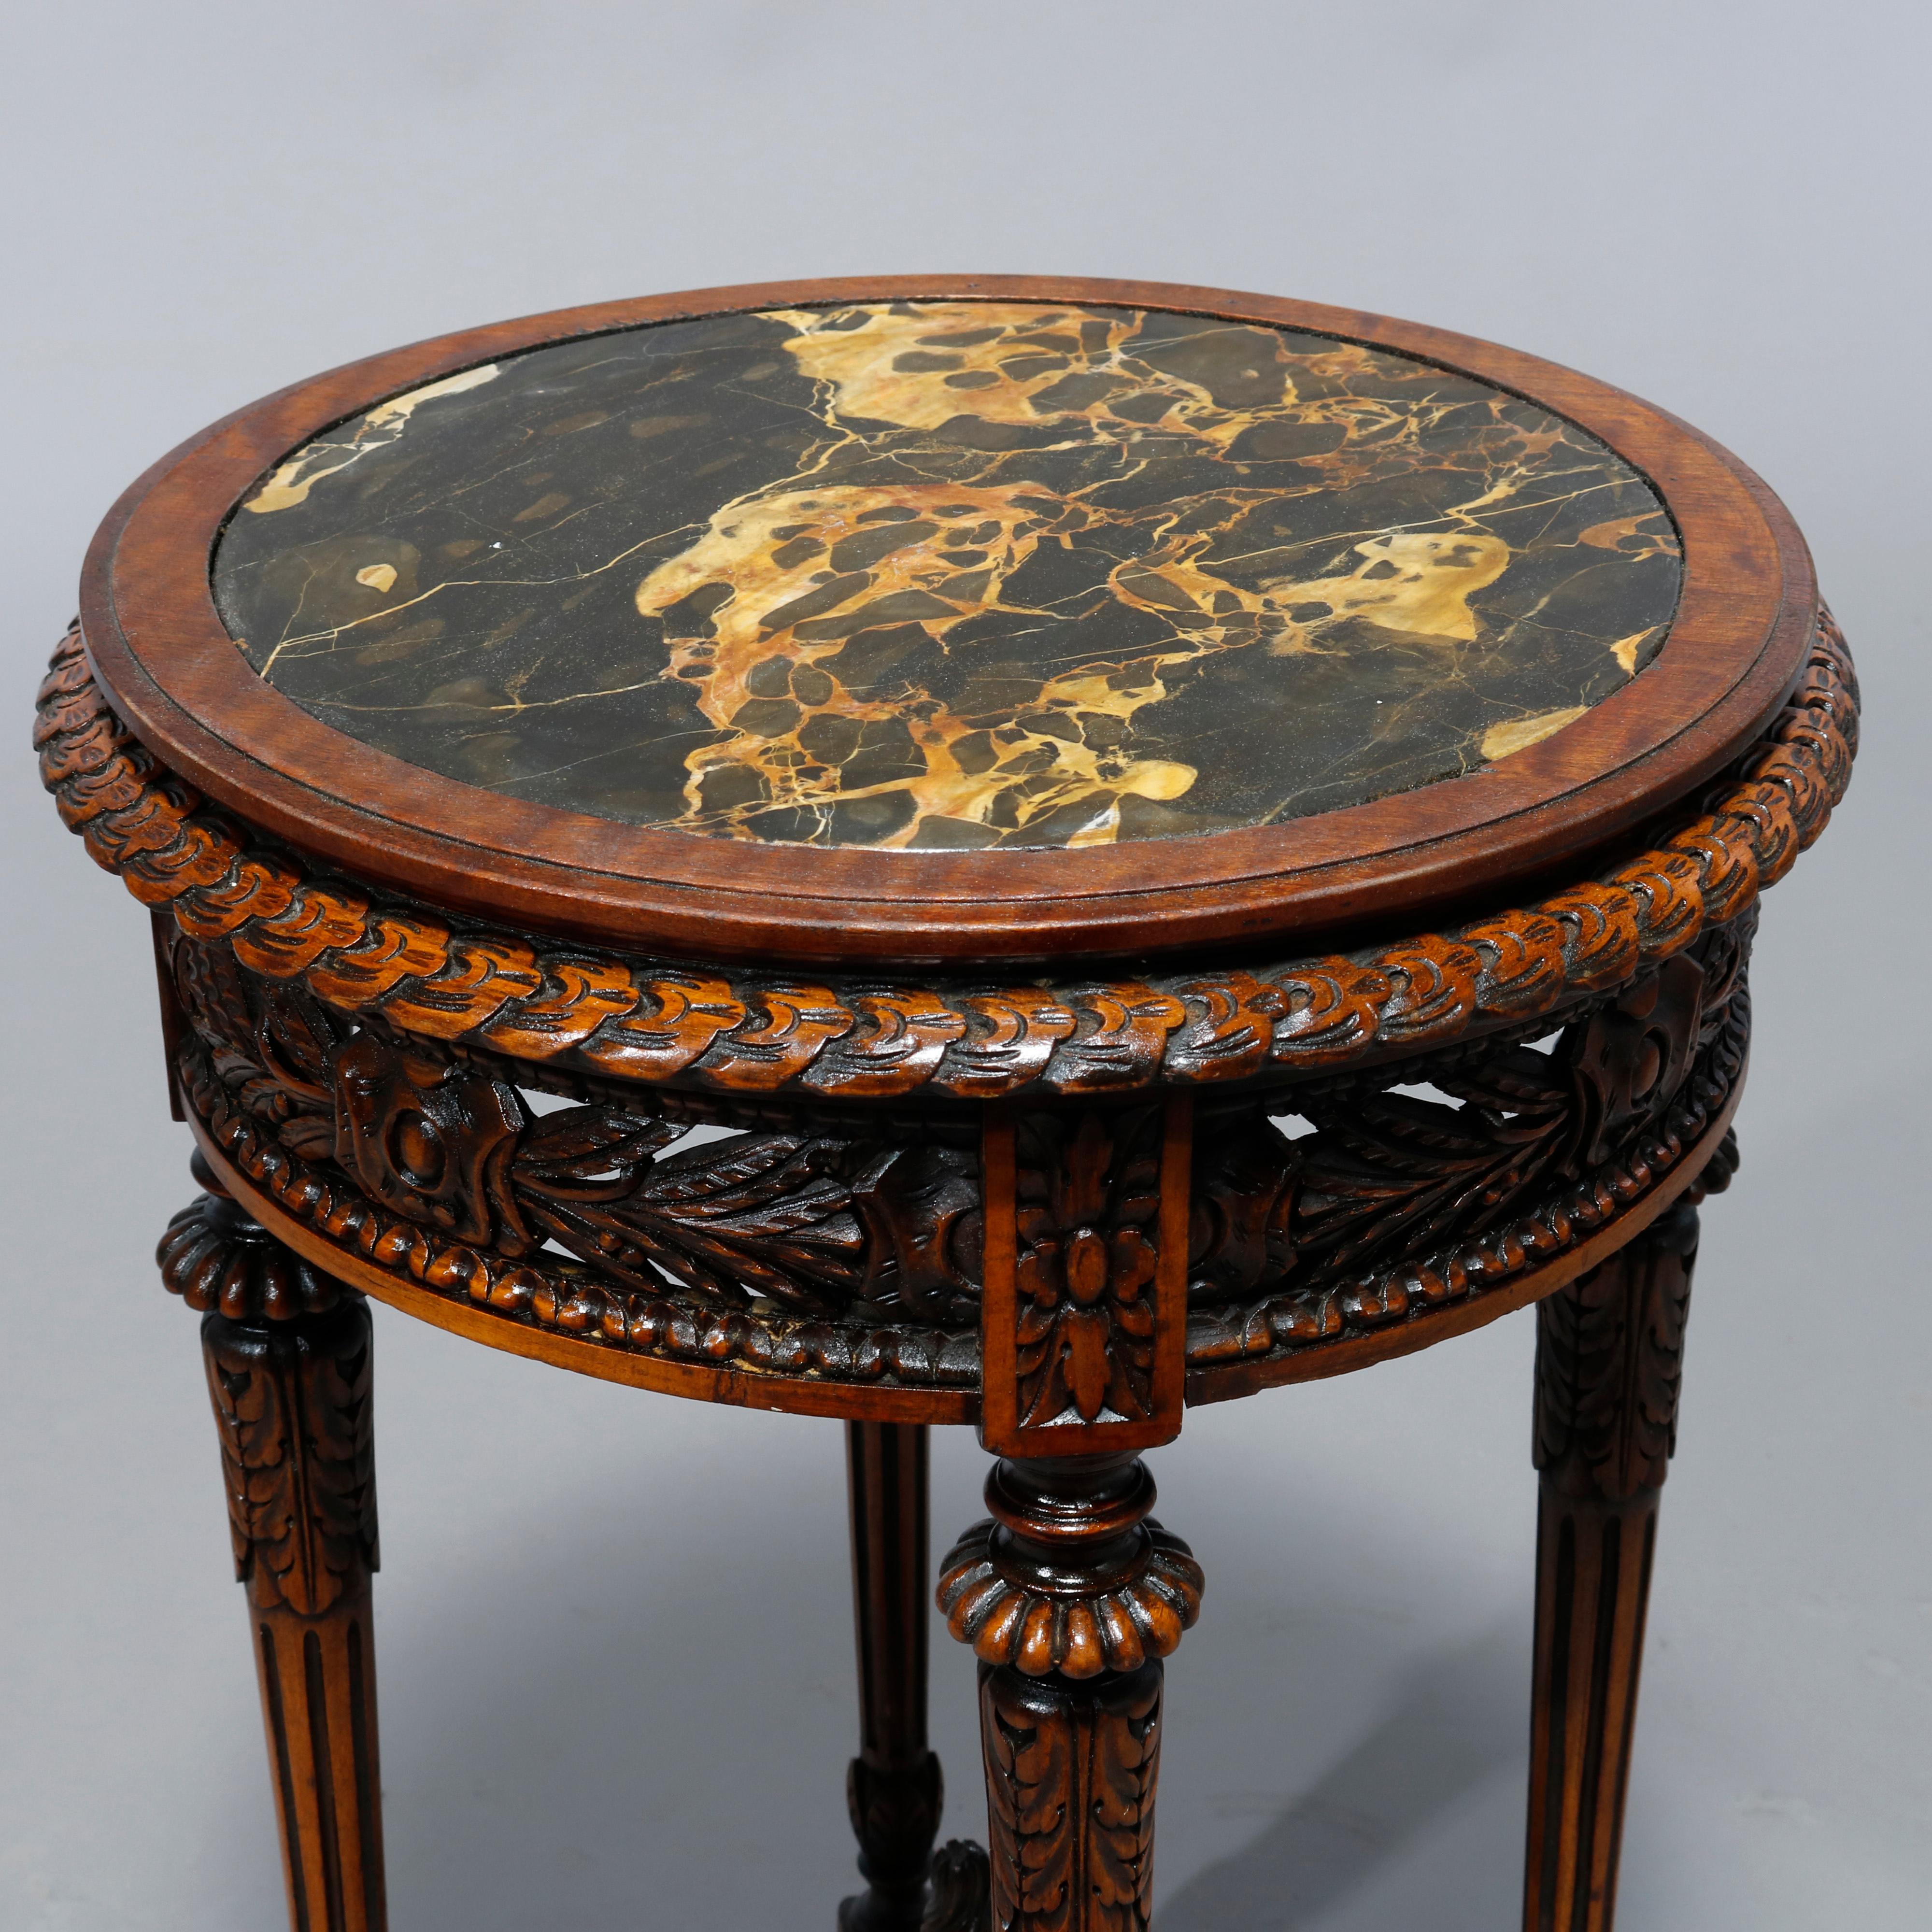 An antique French Louis XVI style Belgian drink stand offers inset marble top over mahogany base having carved and pierced foliate skirt raised on reeded tapered legs having deeply carved stretcher with central urn form finial, c1900

Measures: